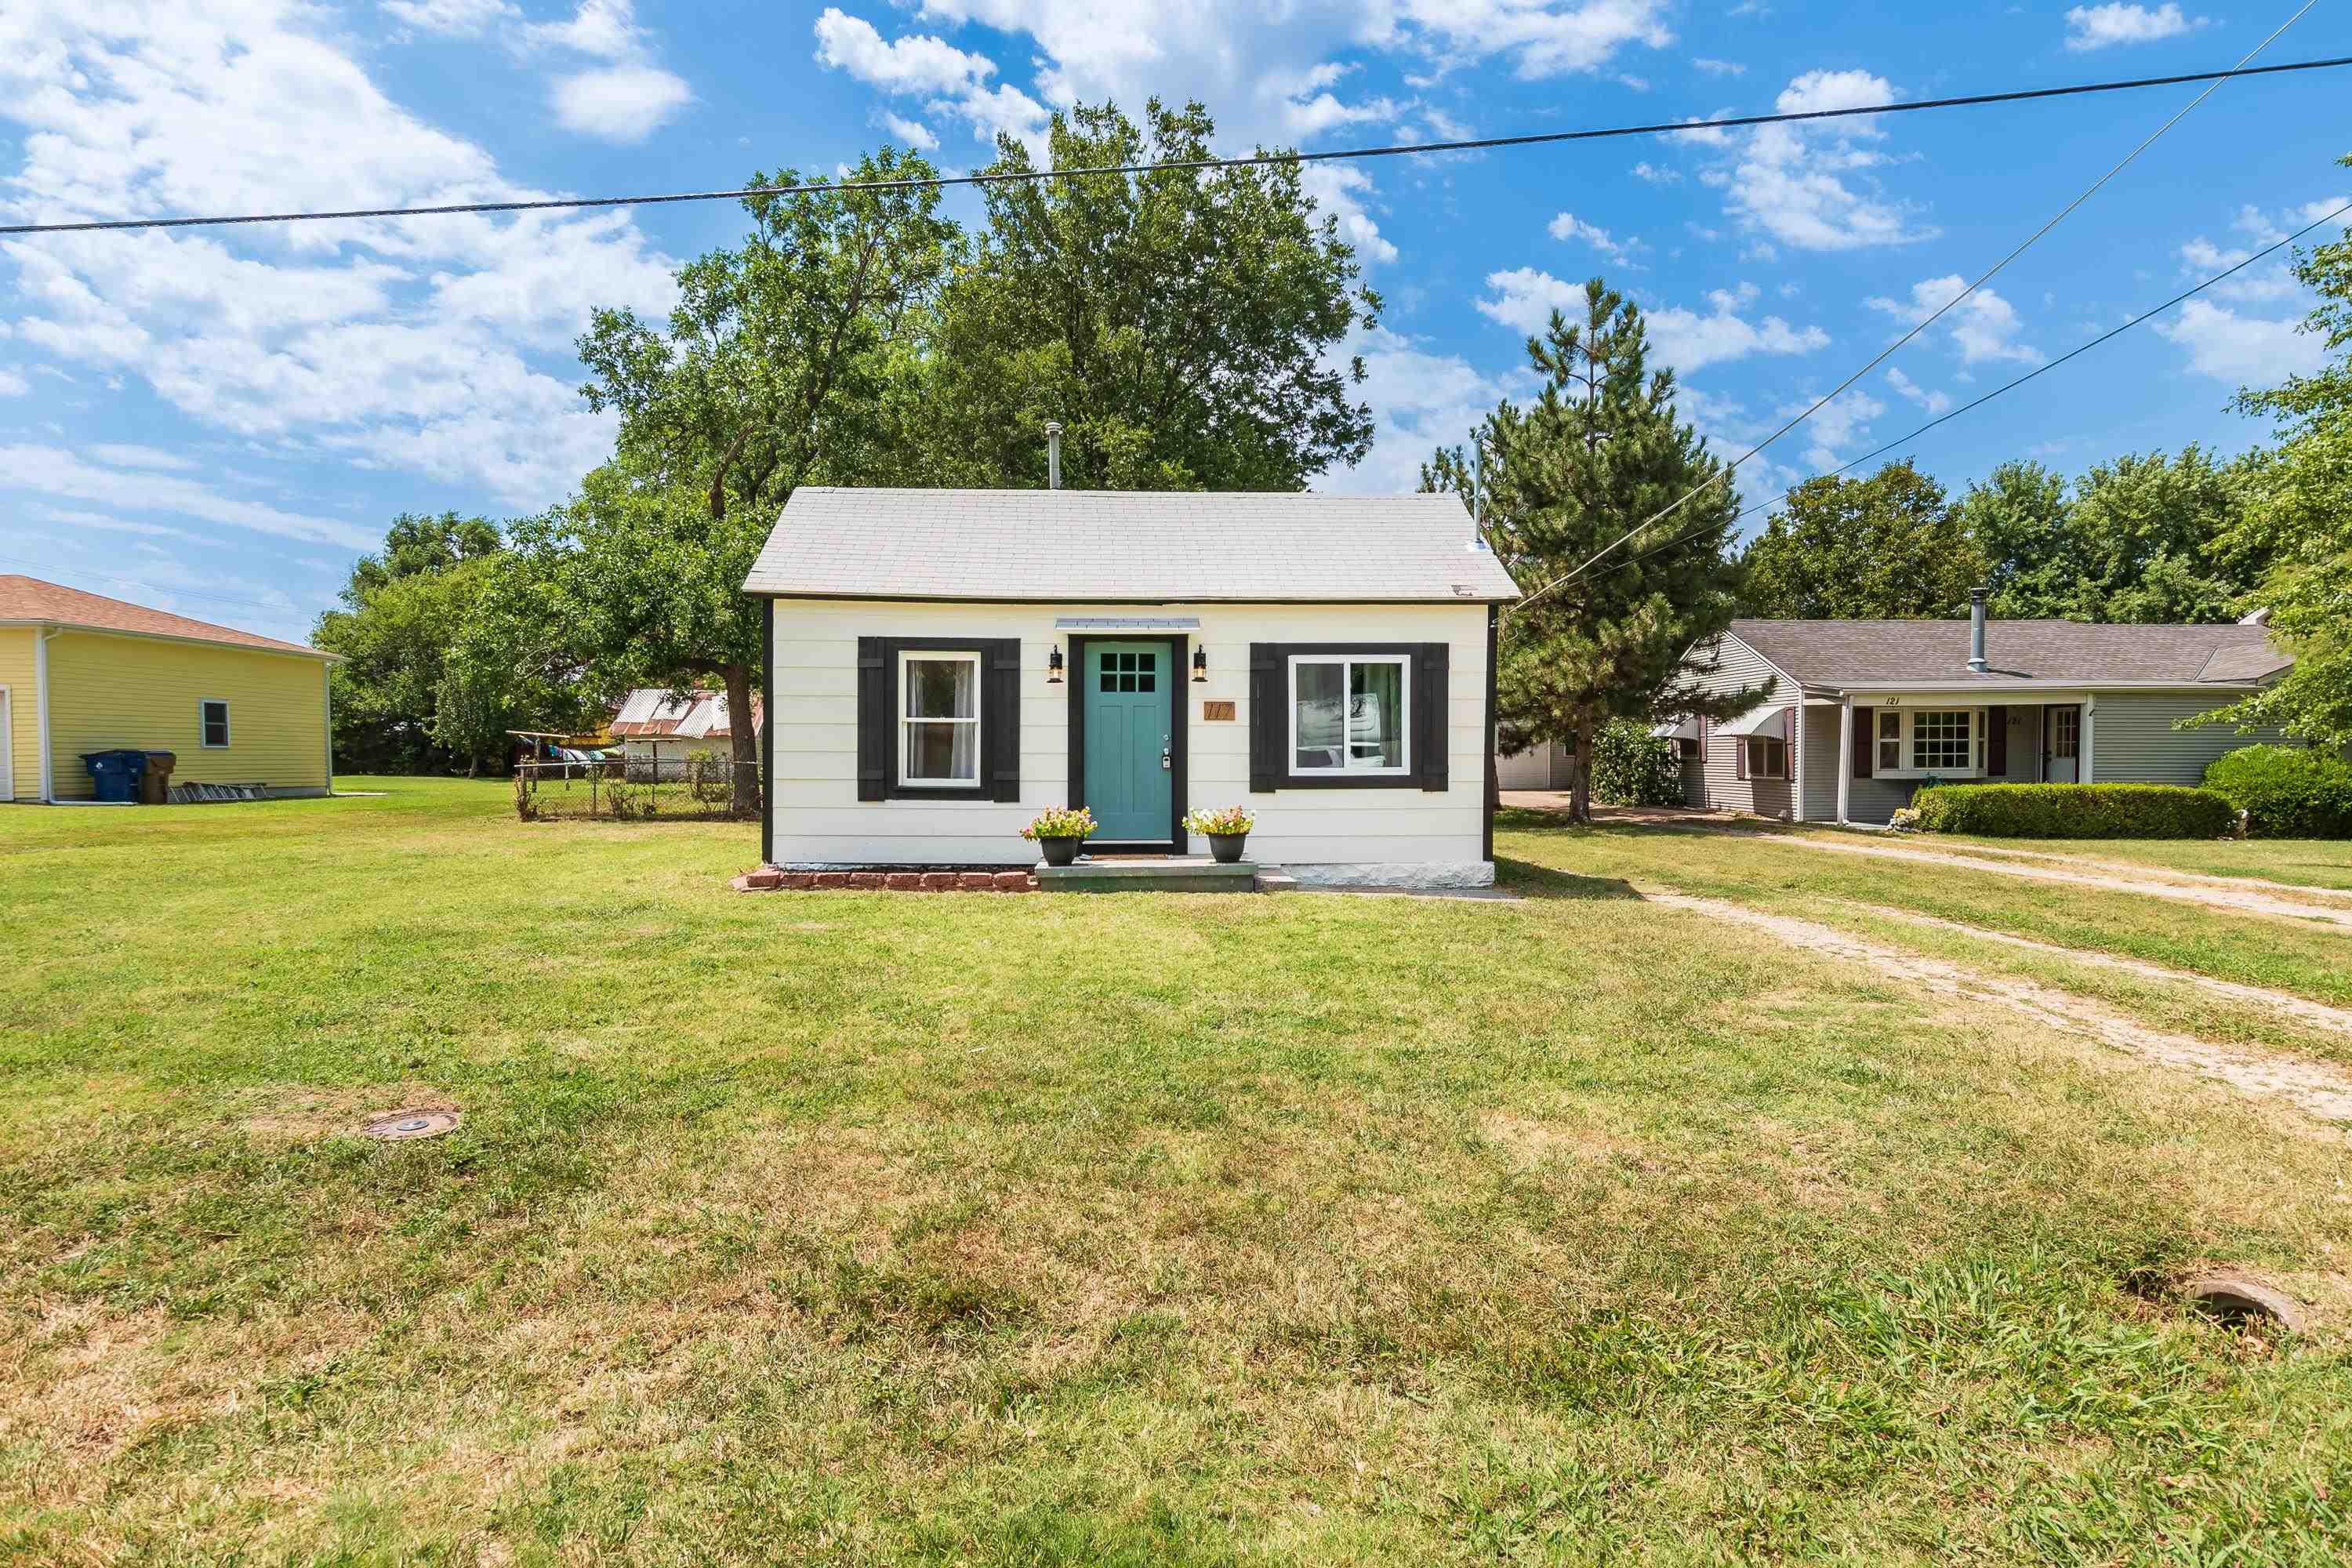 Cutest little house in Goddard!  Completed remodeled.2 bed, 1 bath.  Every inch of the house has bee